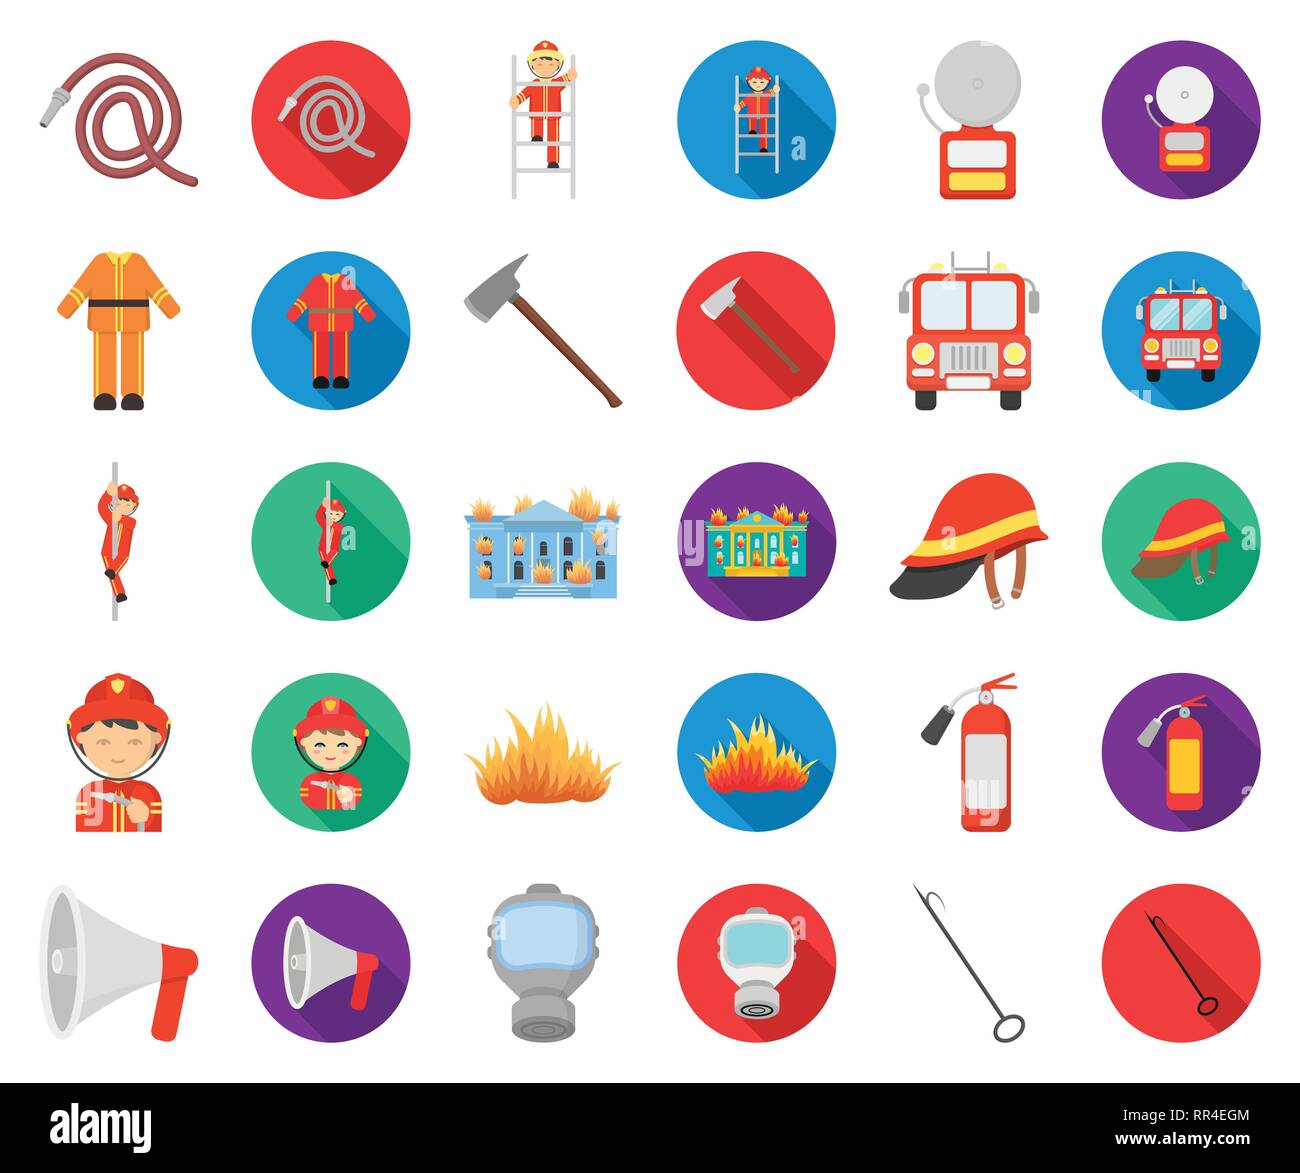 accessories,apparatus,art,attribute,axe,bucket,building,bunker,cartoon,flat,collection,conical,department,design,equipment,extinguishing,extingushier,fire,firefighter,firefighting,flame,gas,gear,helmet,icon,illustration,isolated,logo,mask,organization,pike,pole,pump,ring,separation,service,set,sign,slide,symbol,tools,vector,web Vector Vectors , Stock Vector